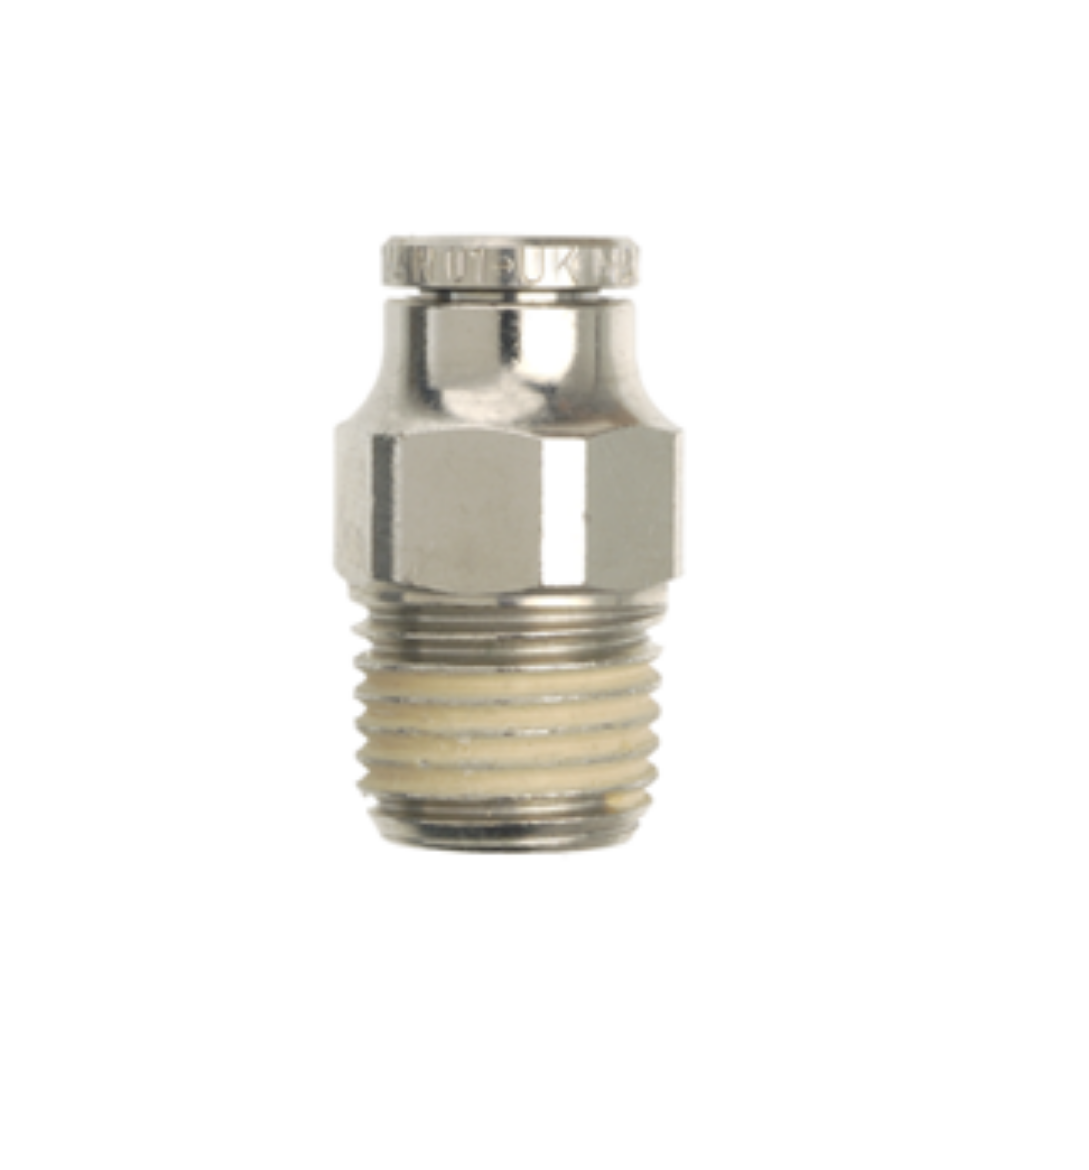 Picture of QFM3NP 6mmx1/4 MI BSPT Nickel Plated Adaptor